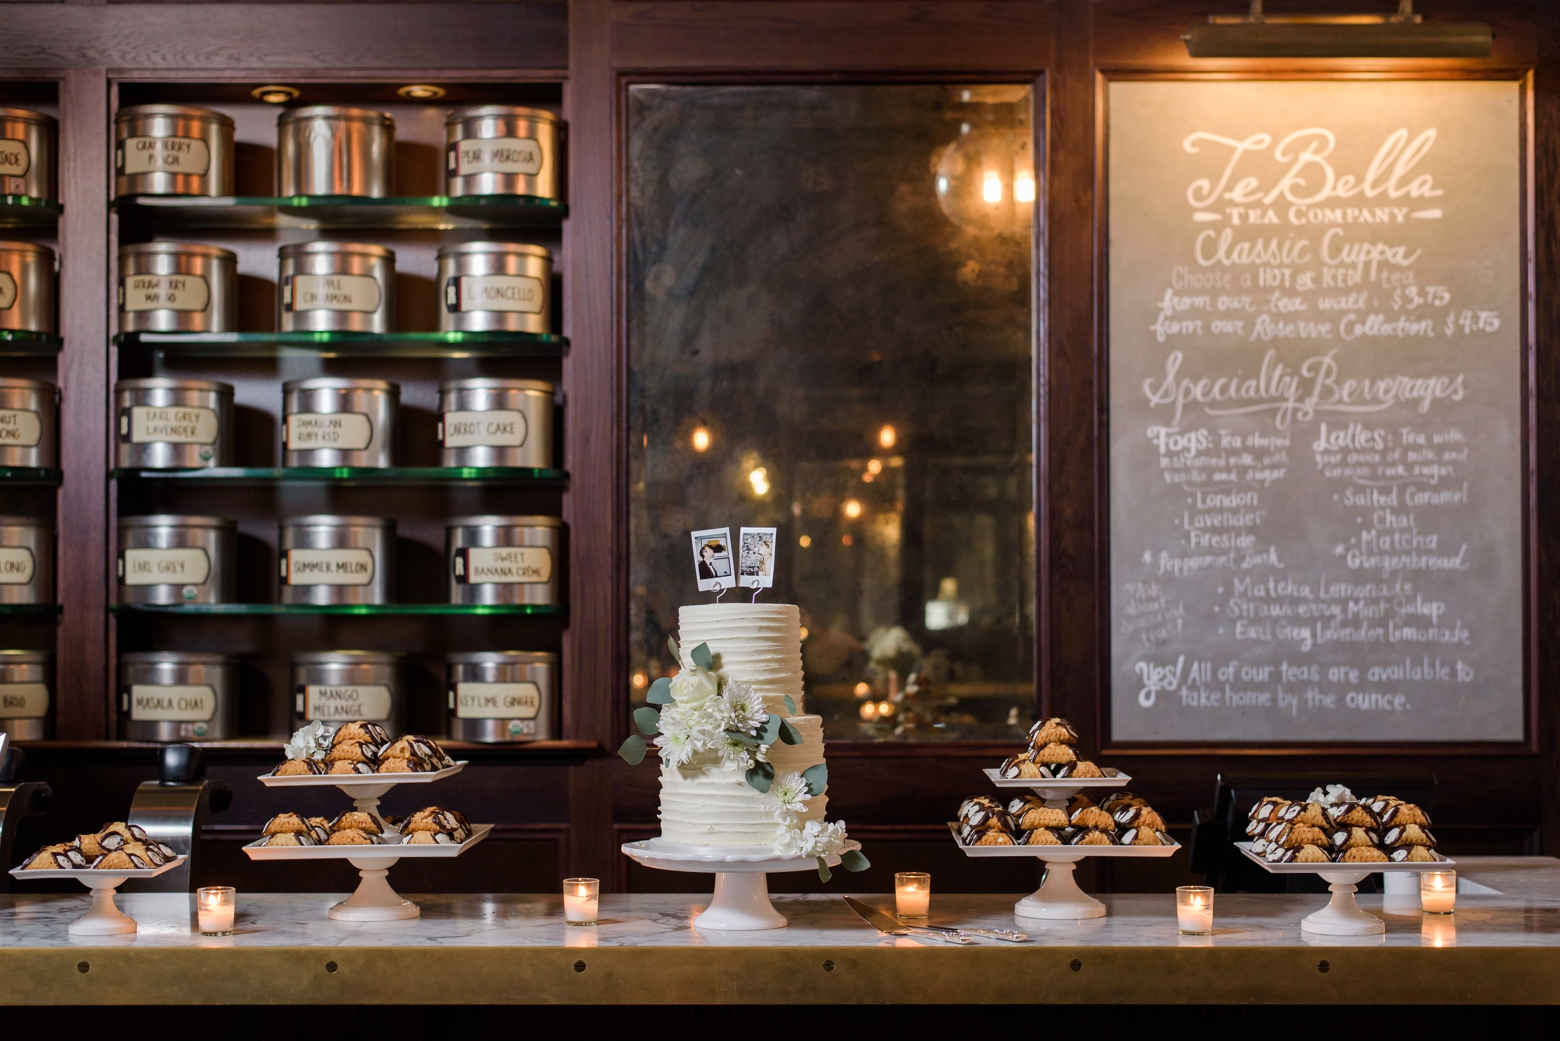 Dessert table across the counter of TeBella tea company in Oxford Exchange